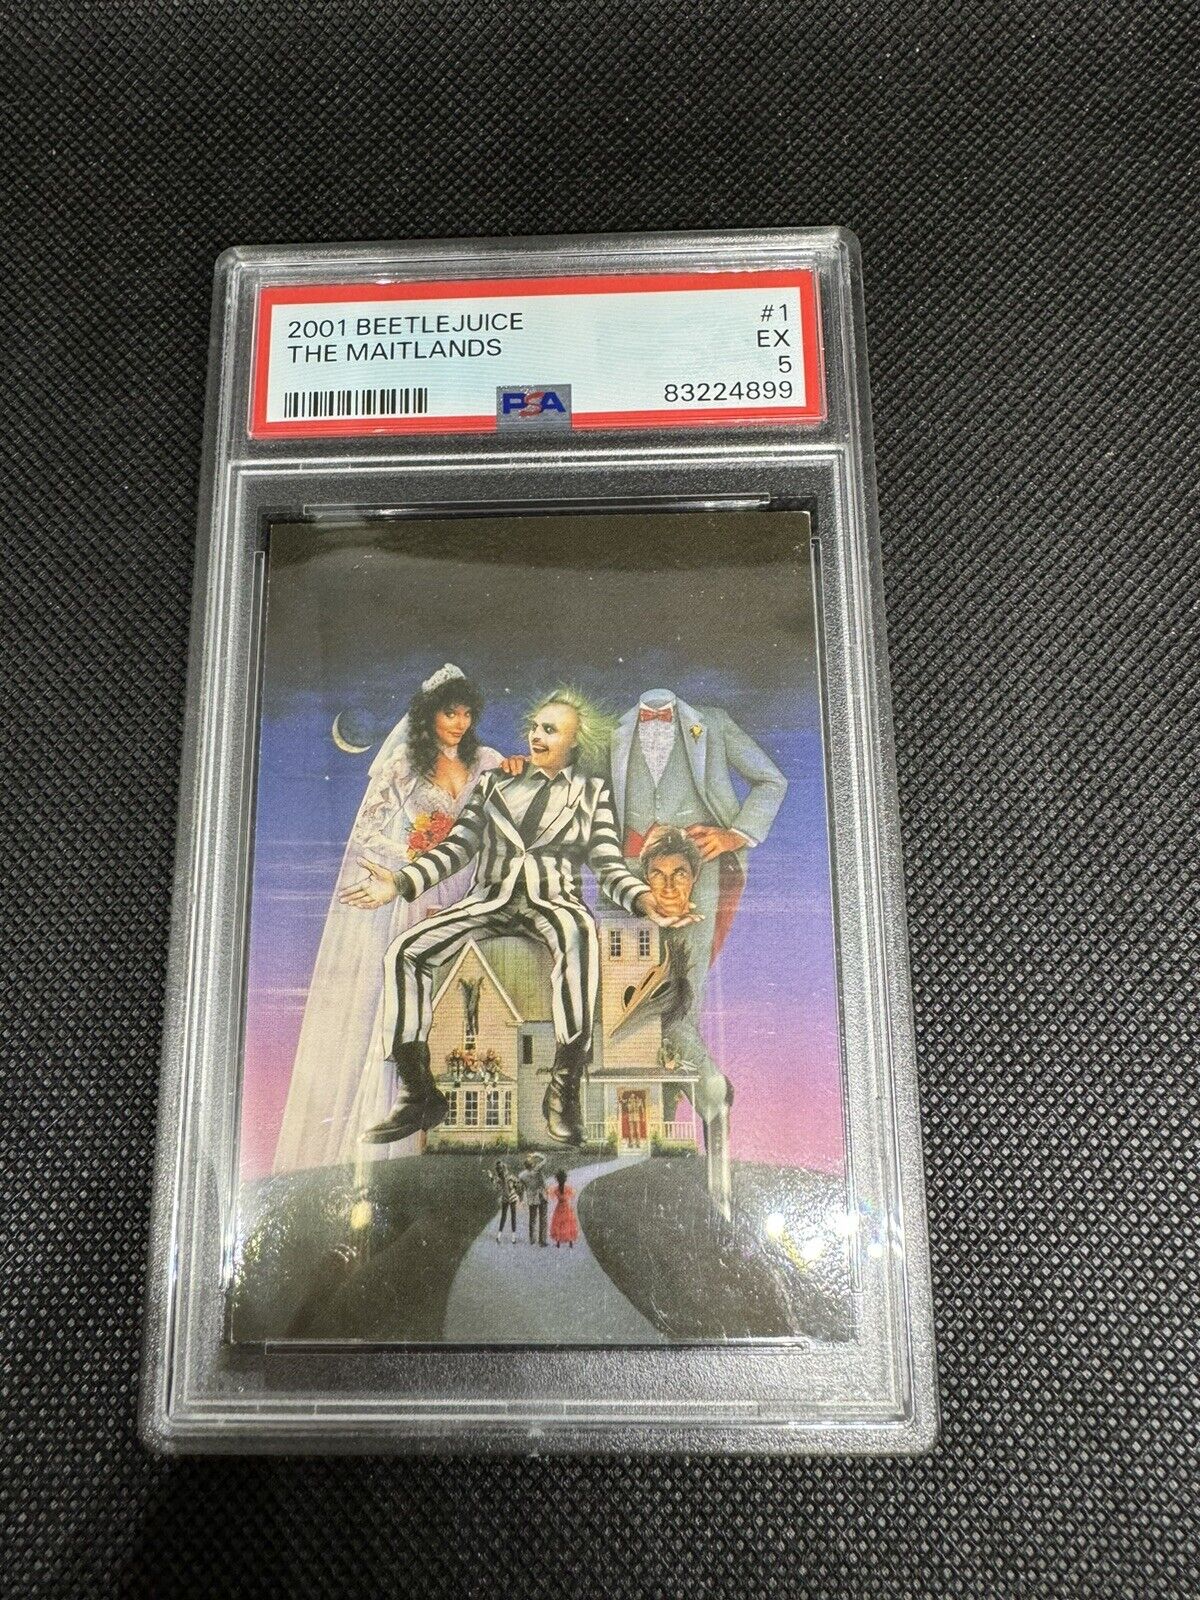 Warner Brothers 2001 Beetlejuice The Maitlands Collectible PSA 5